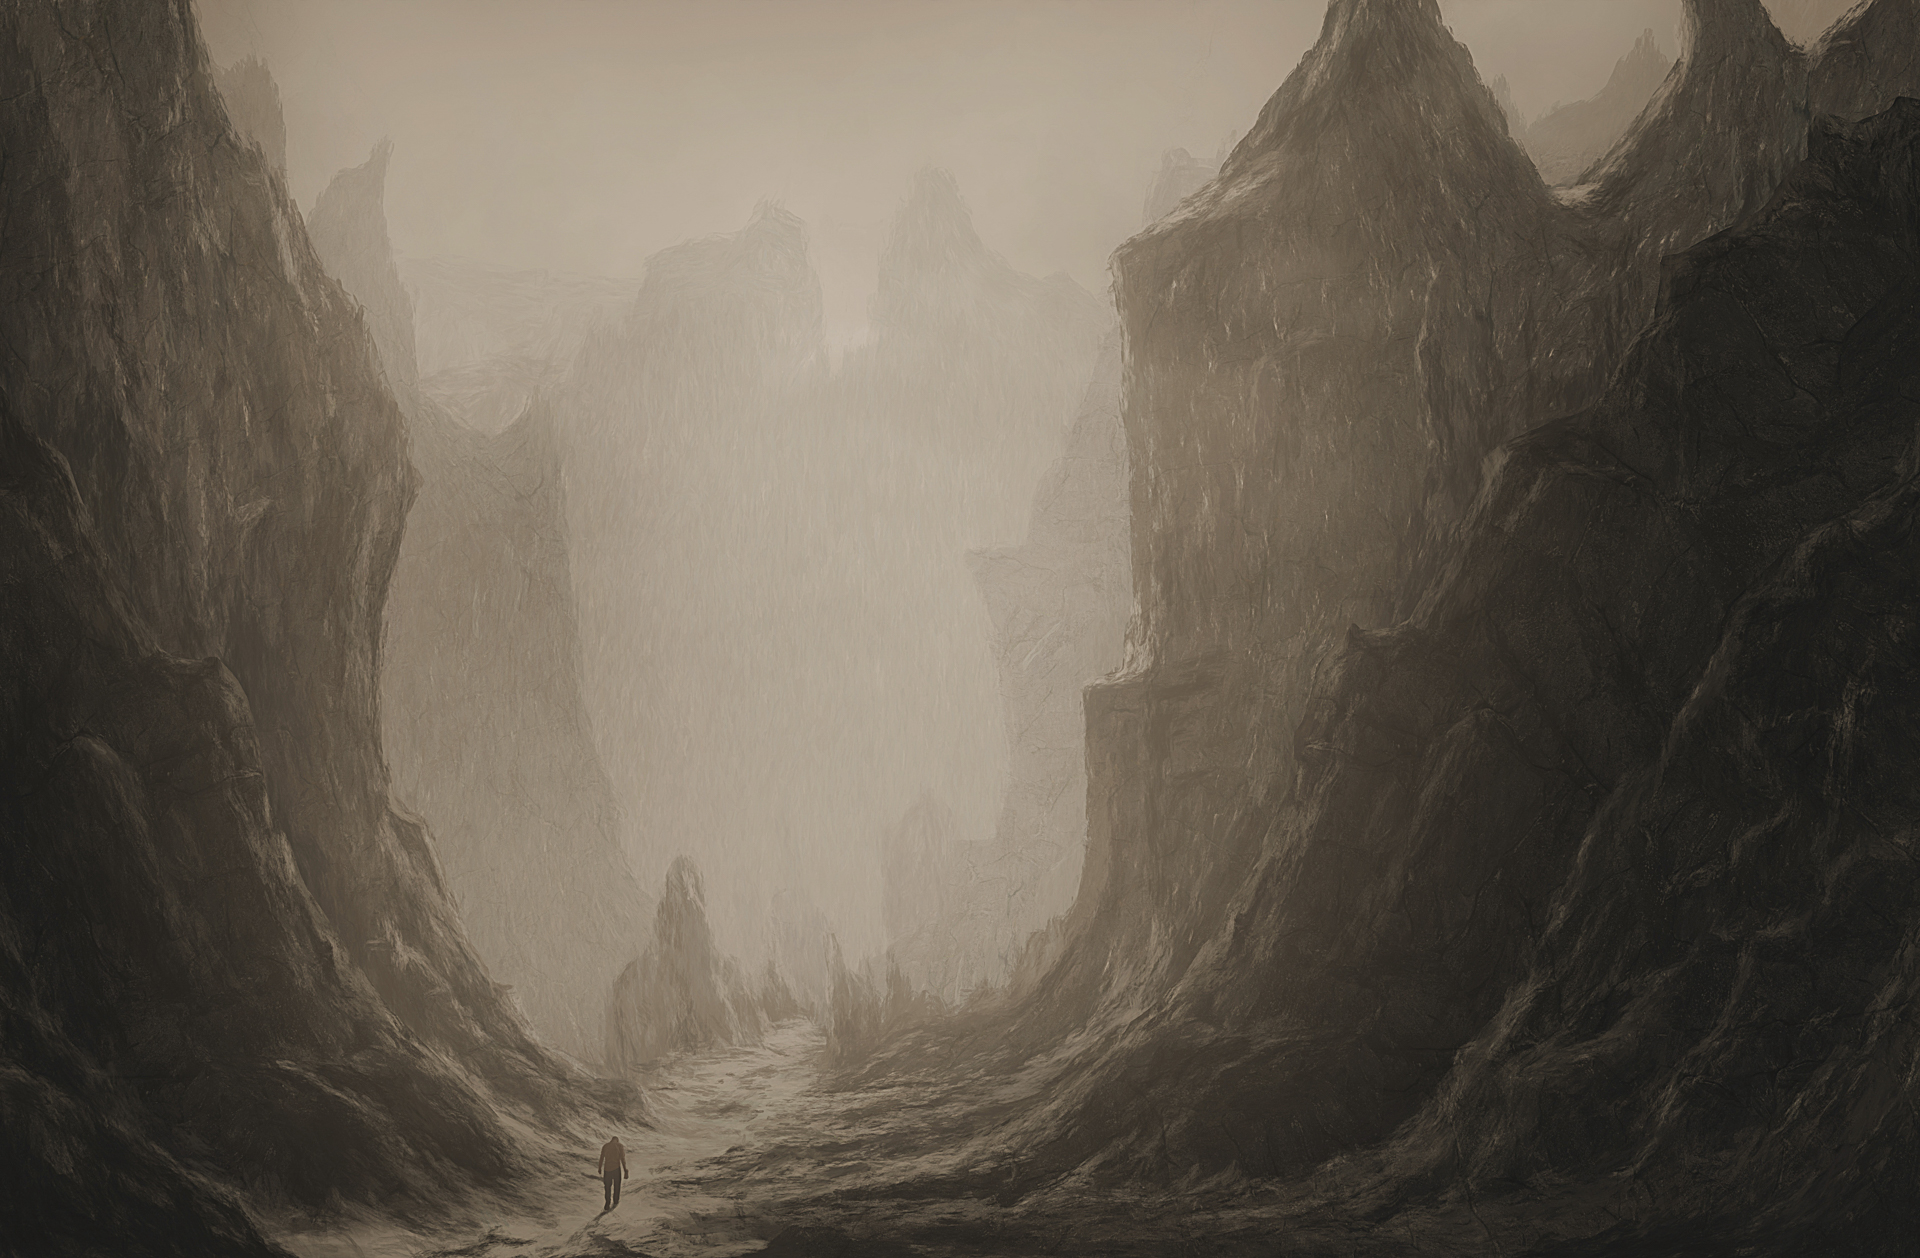 Surreal painting of a man walking through an ominous valley